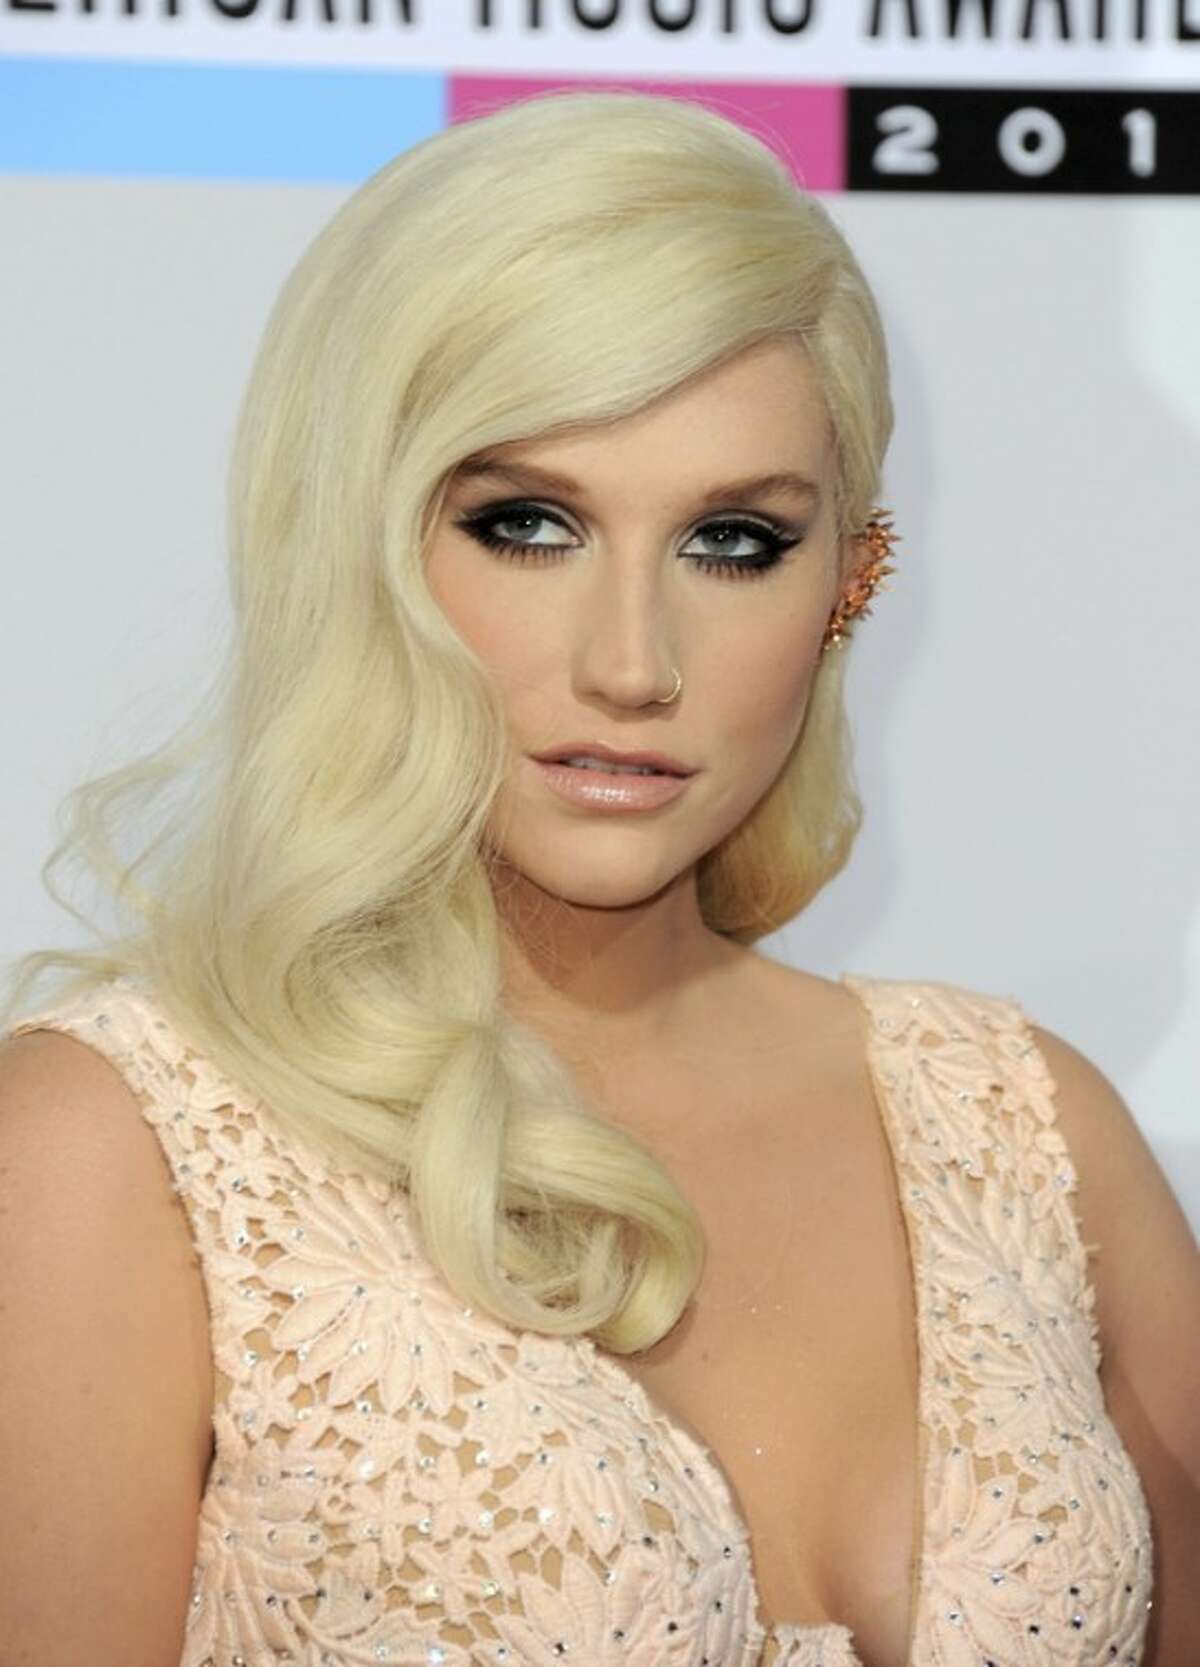 Ke$ha arrives at the 40th Anniversary American Music Awards on Sunday, Nov. 18, 2012, in Los Angeles. (Photo by Jordan Strauss/Invision/AP)